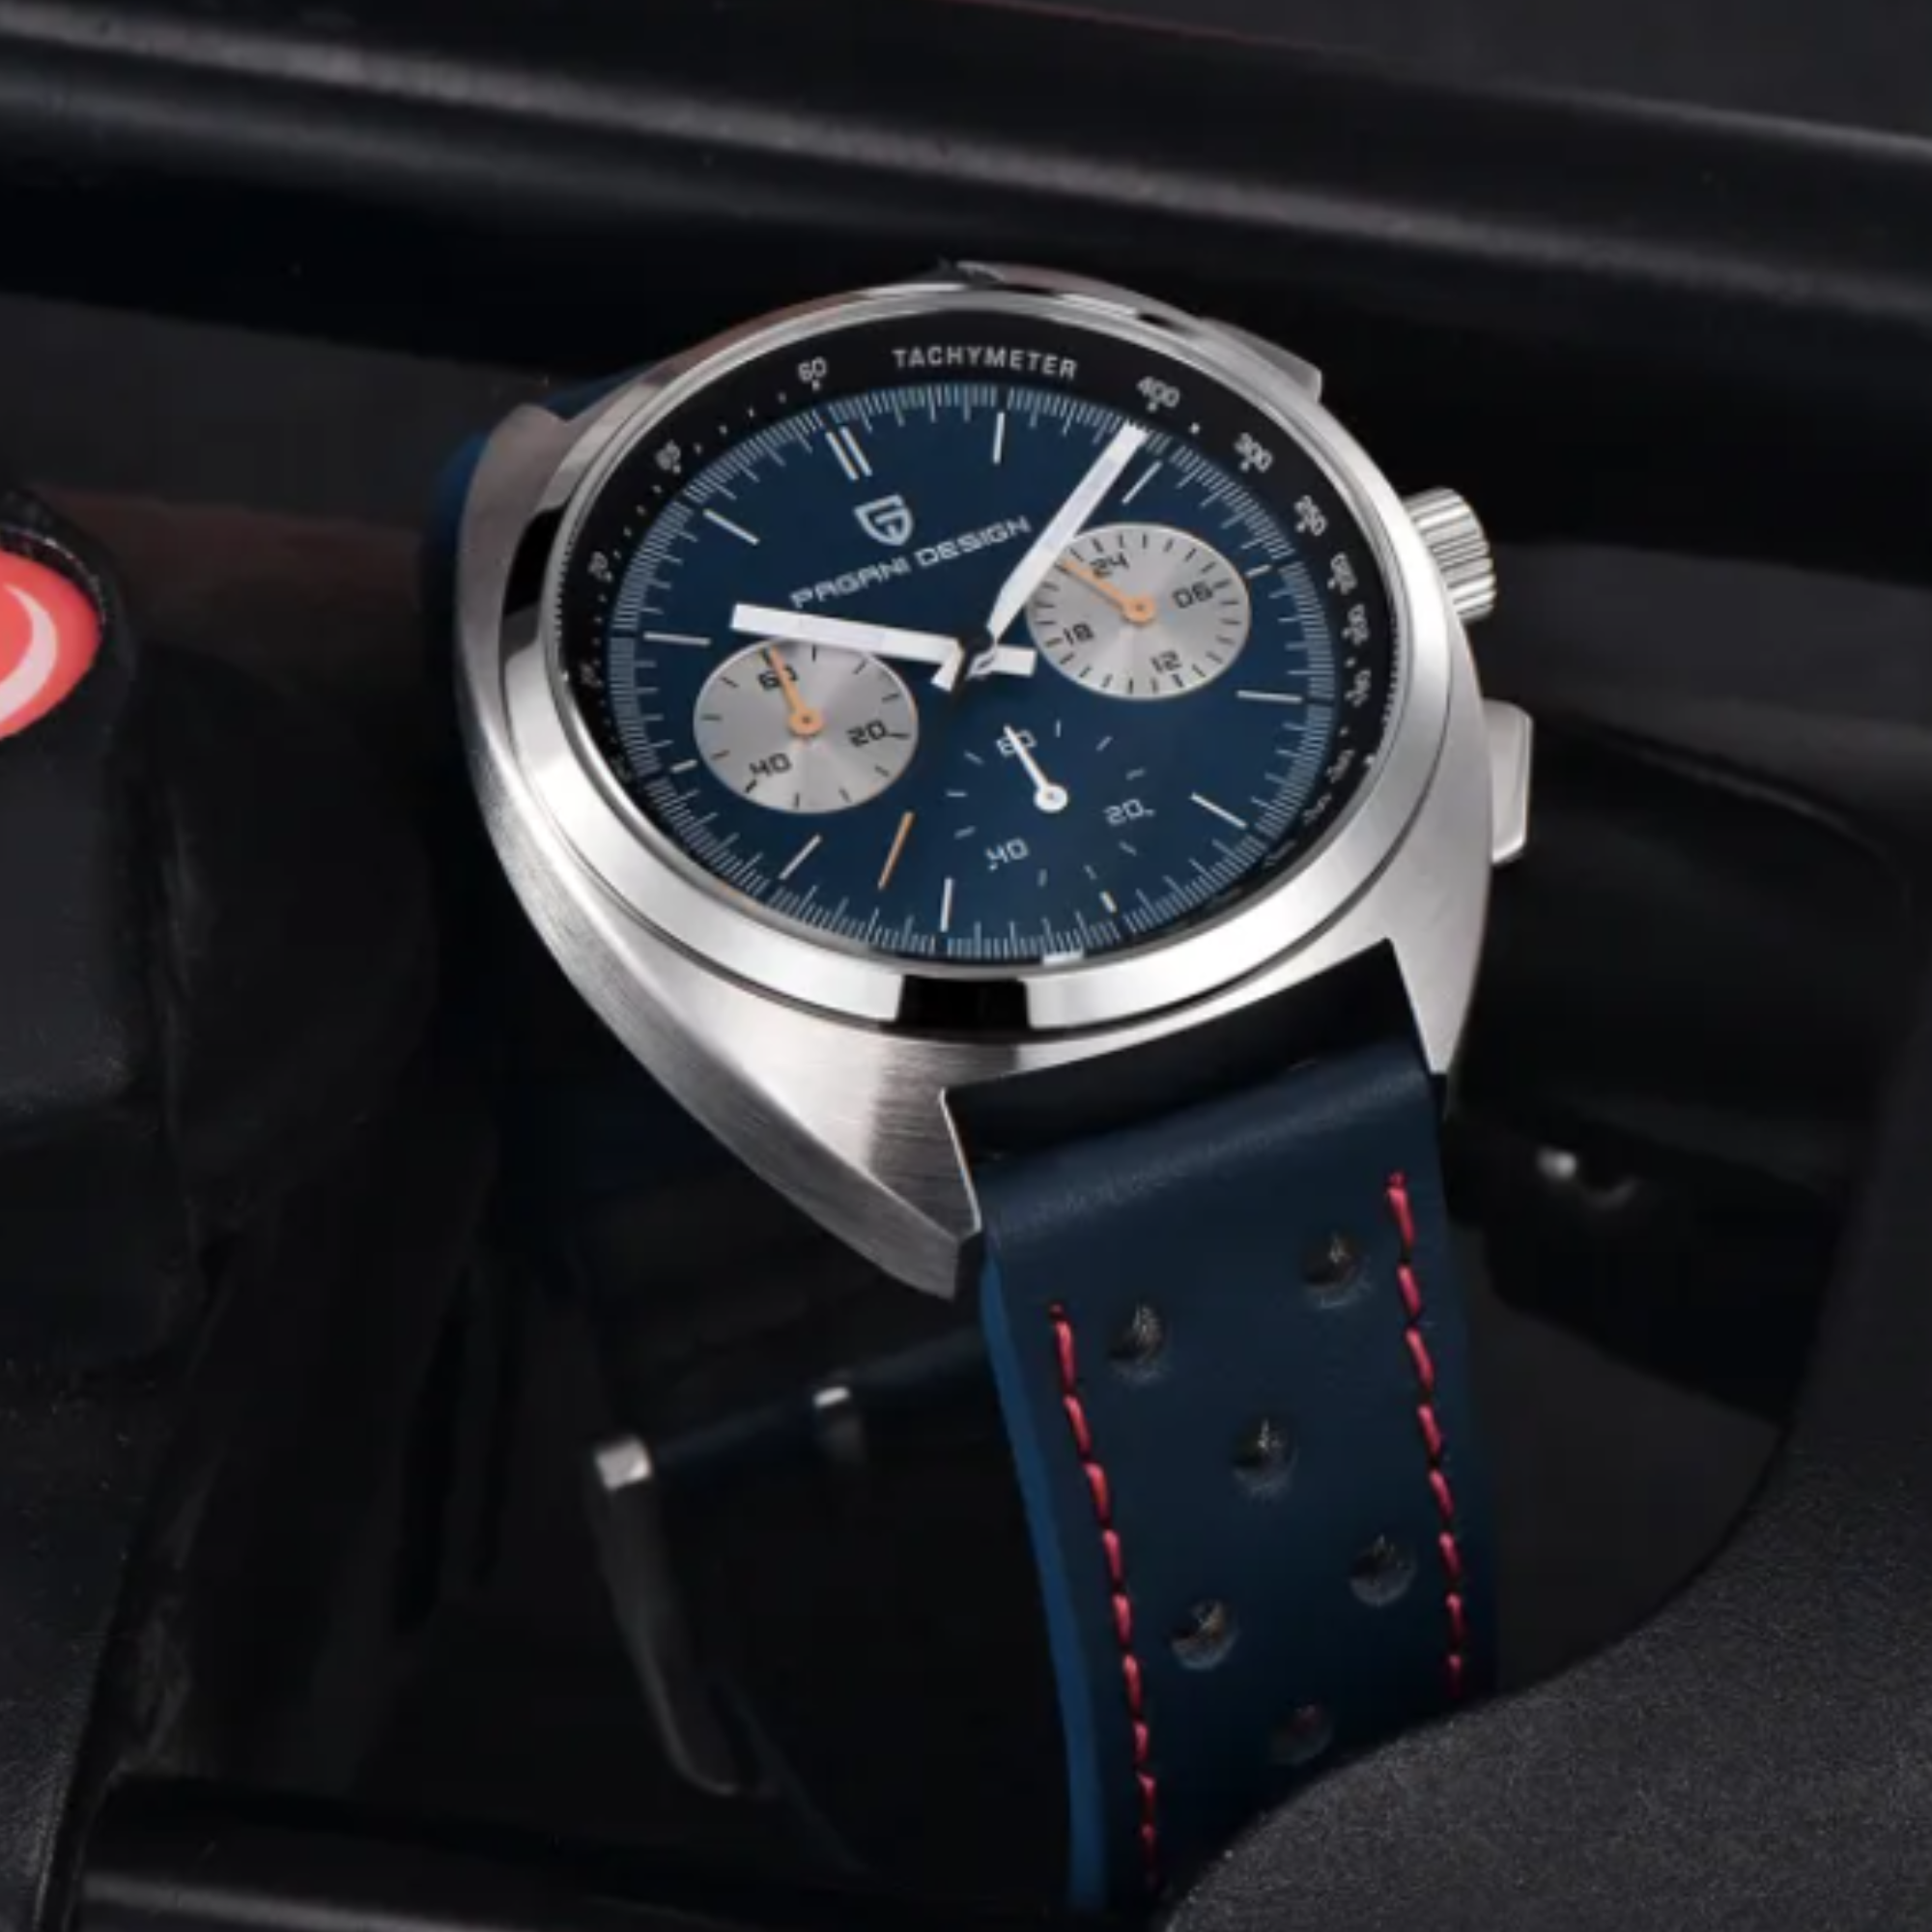 PAGANI DESIGN PD-1782 Men's Quartz Watches Chronograph Stainless Steel 40mm Sports Wrist Watch for Men - Blue Dial With Blue Leather Strap